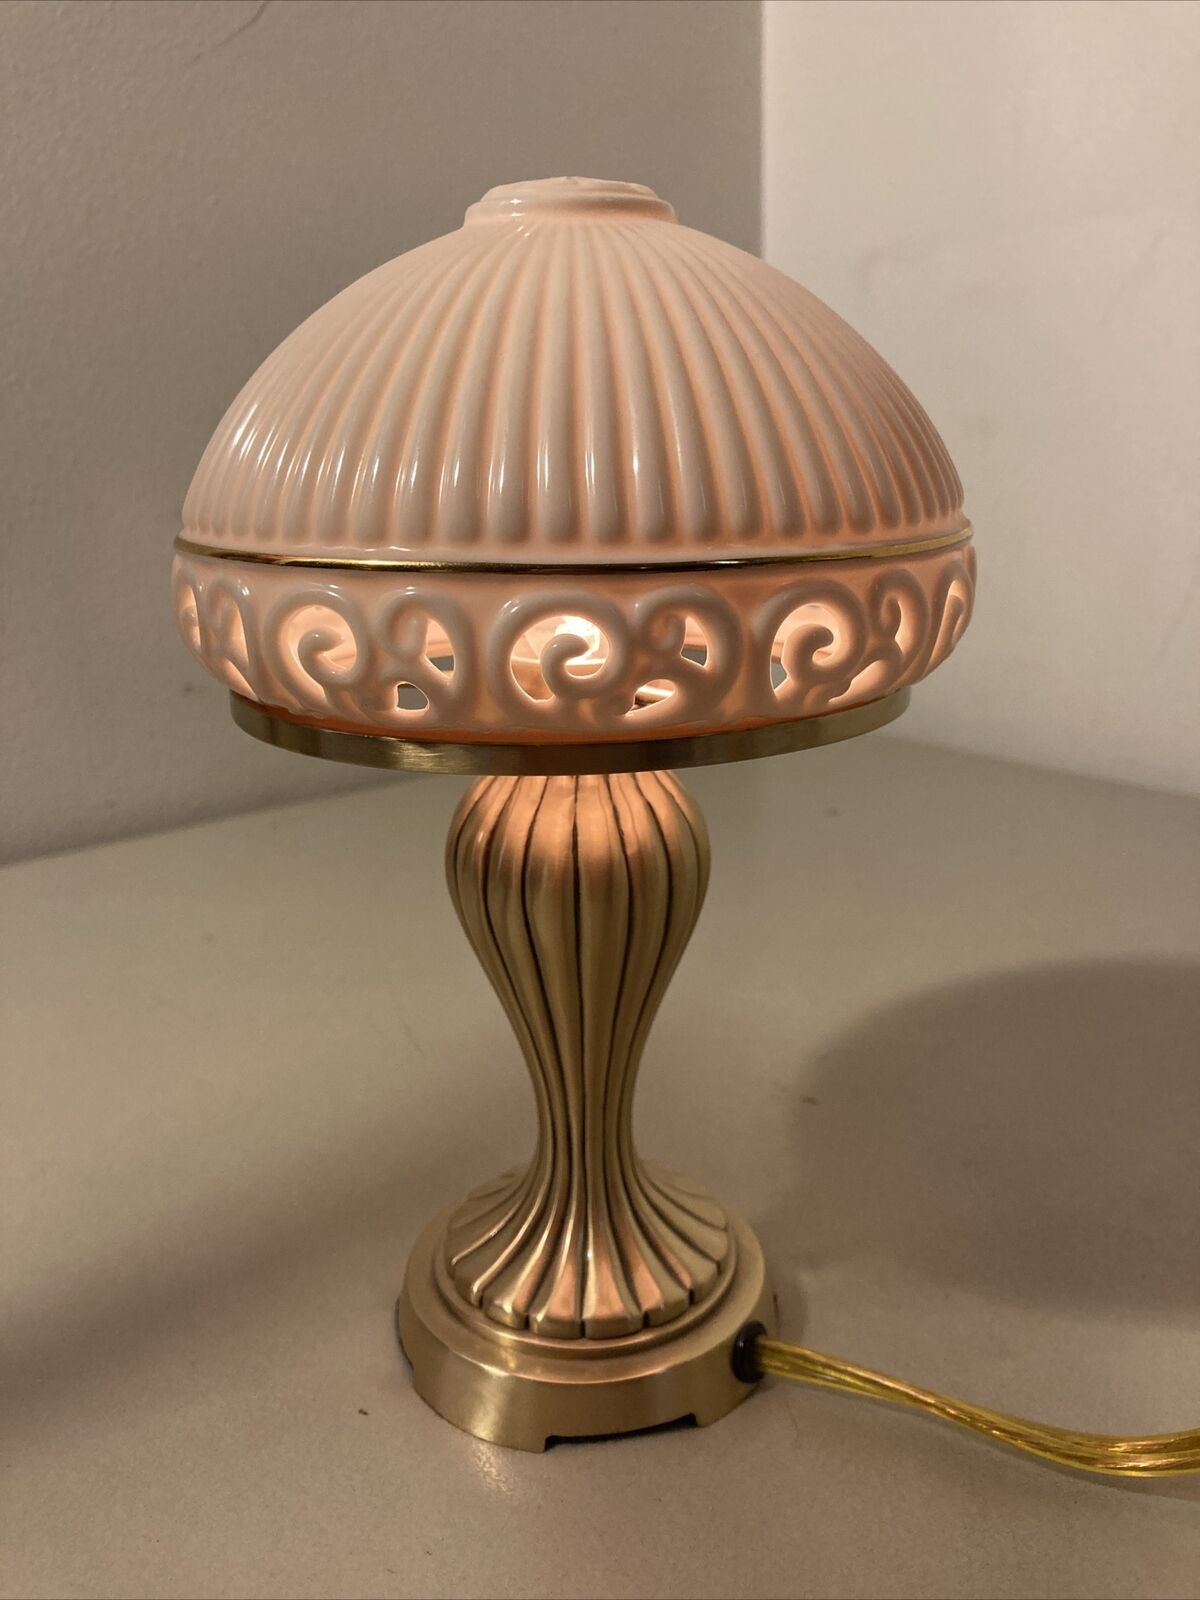 Quoizel Lenox Lamp Brass And Porcelain Accent Table Lamp With Shade 9” Petite